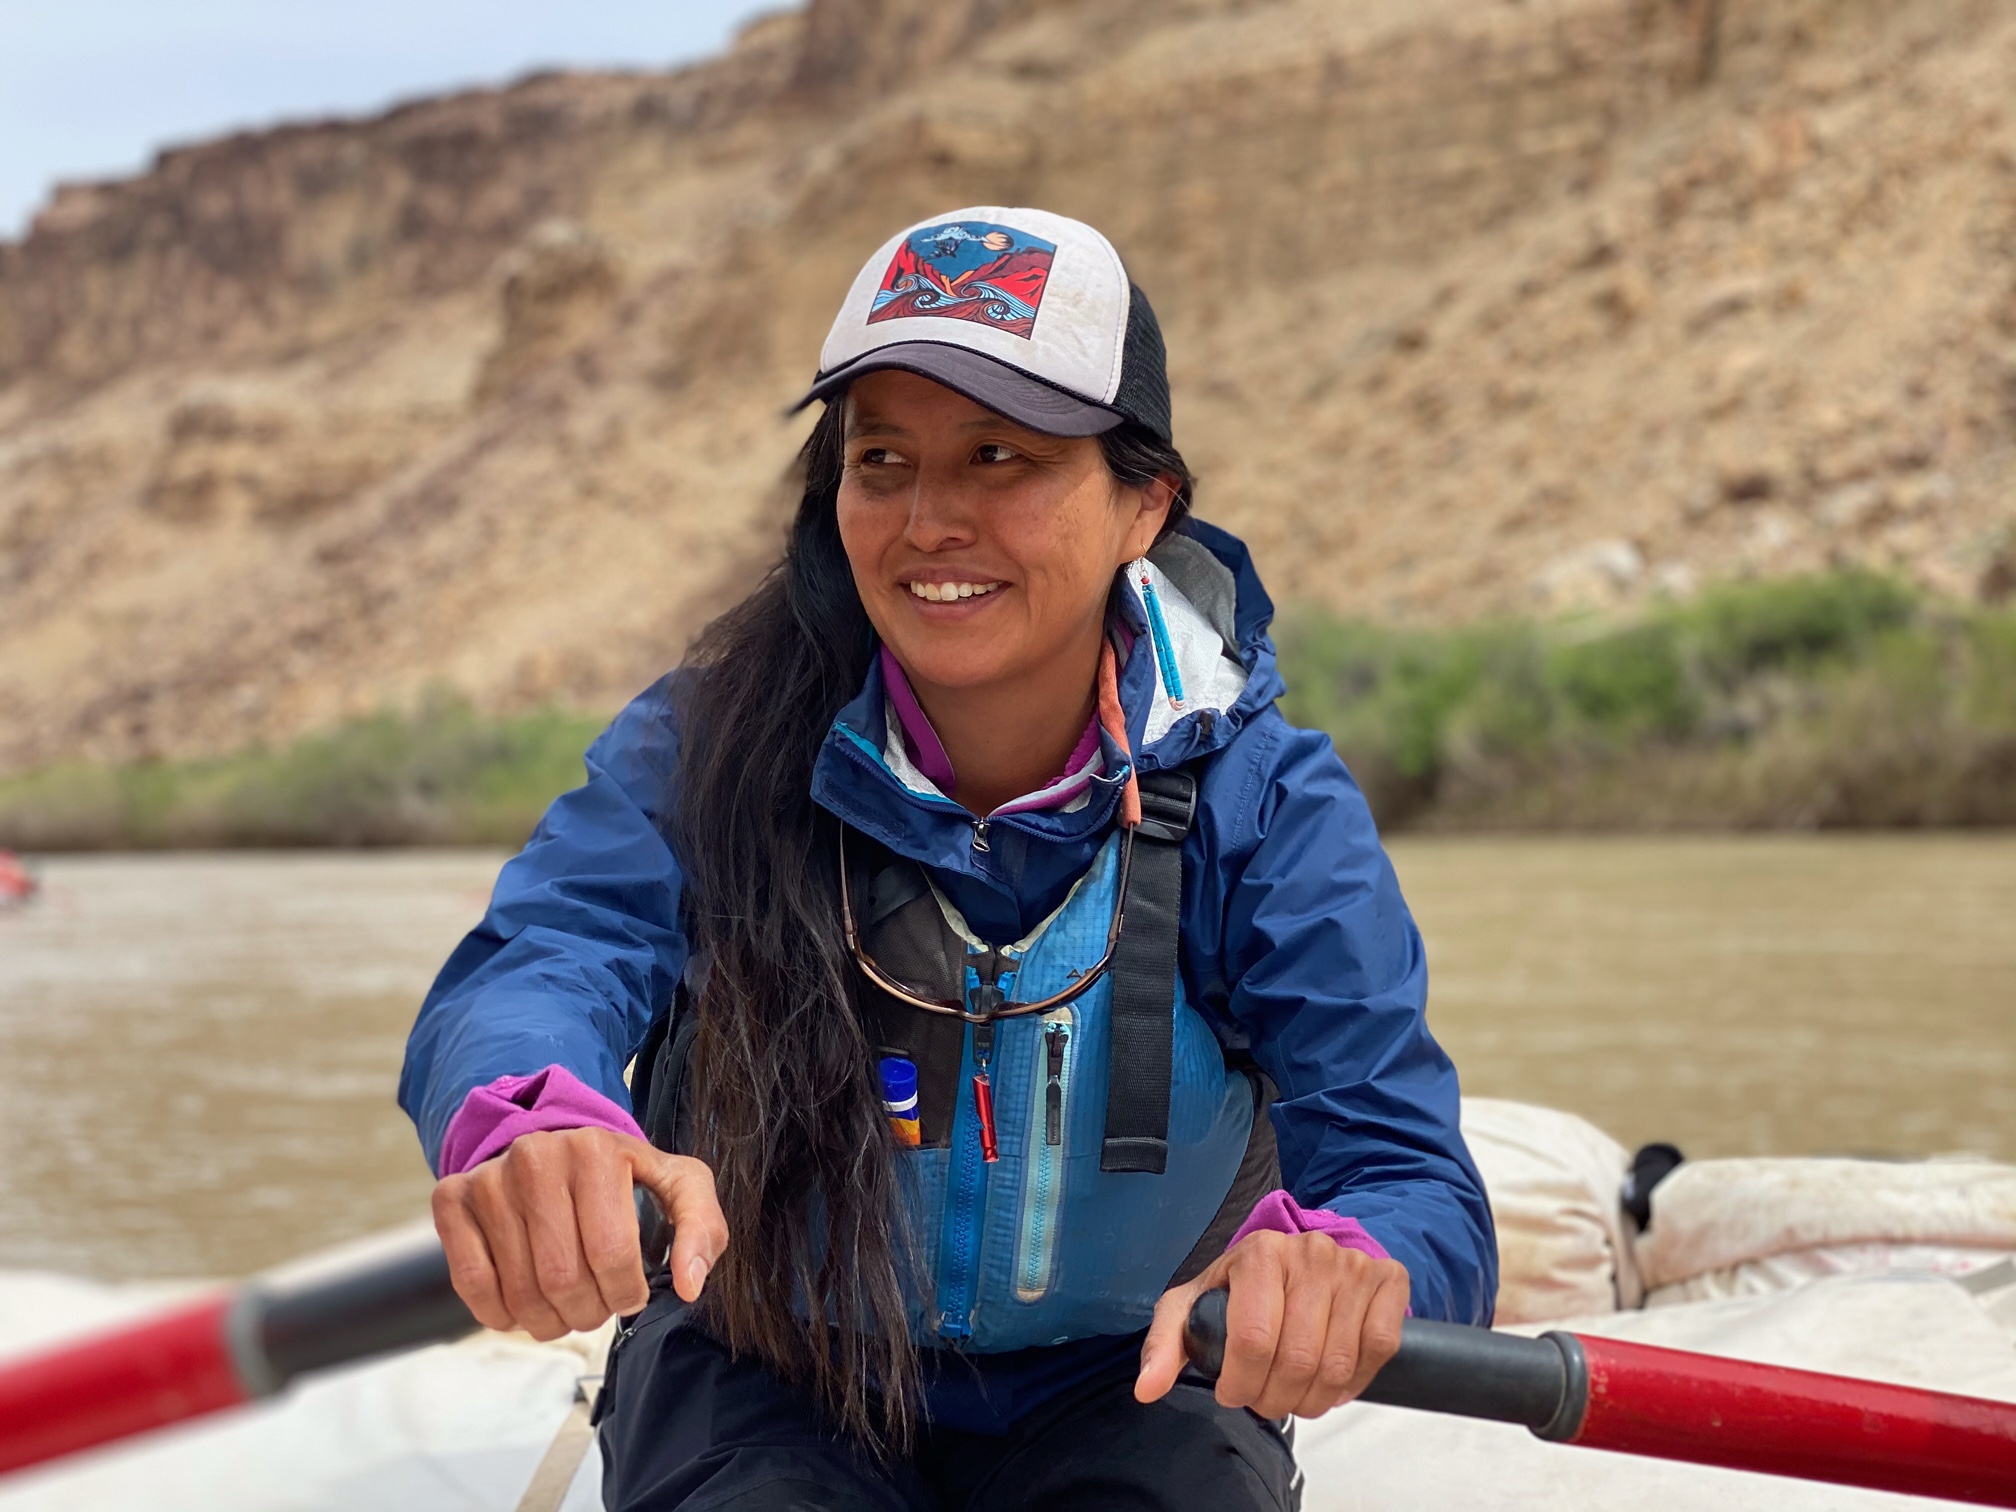 Colleen on a guide training trip on the Green River in Utah, May 2021. Photo credit: Lauren Wood.